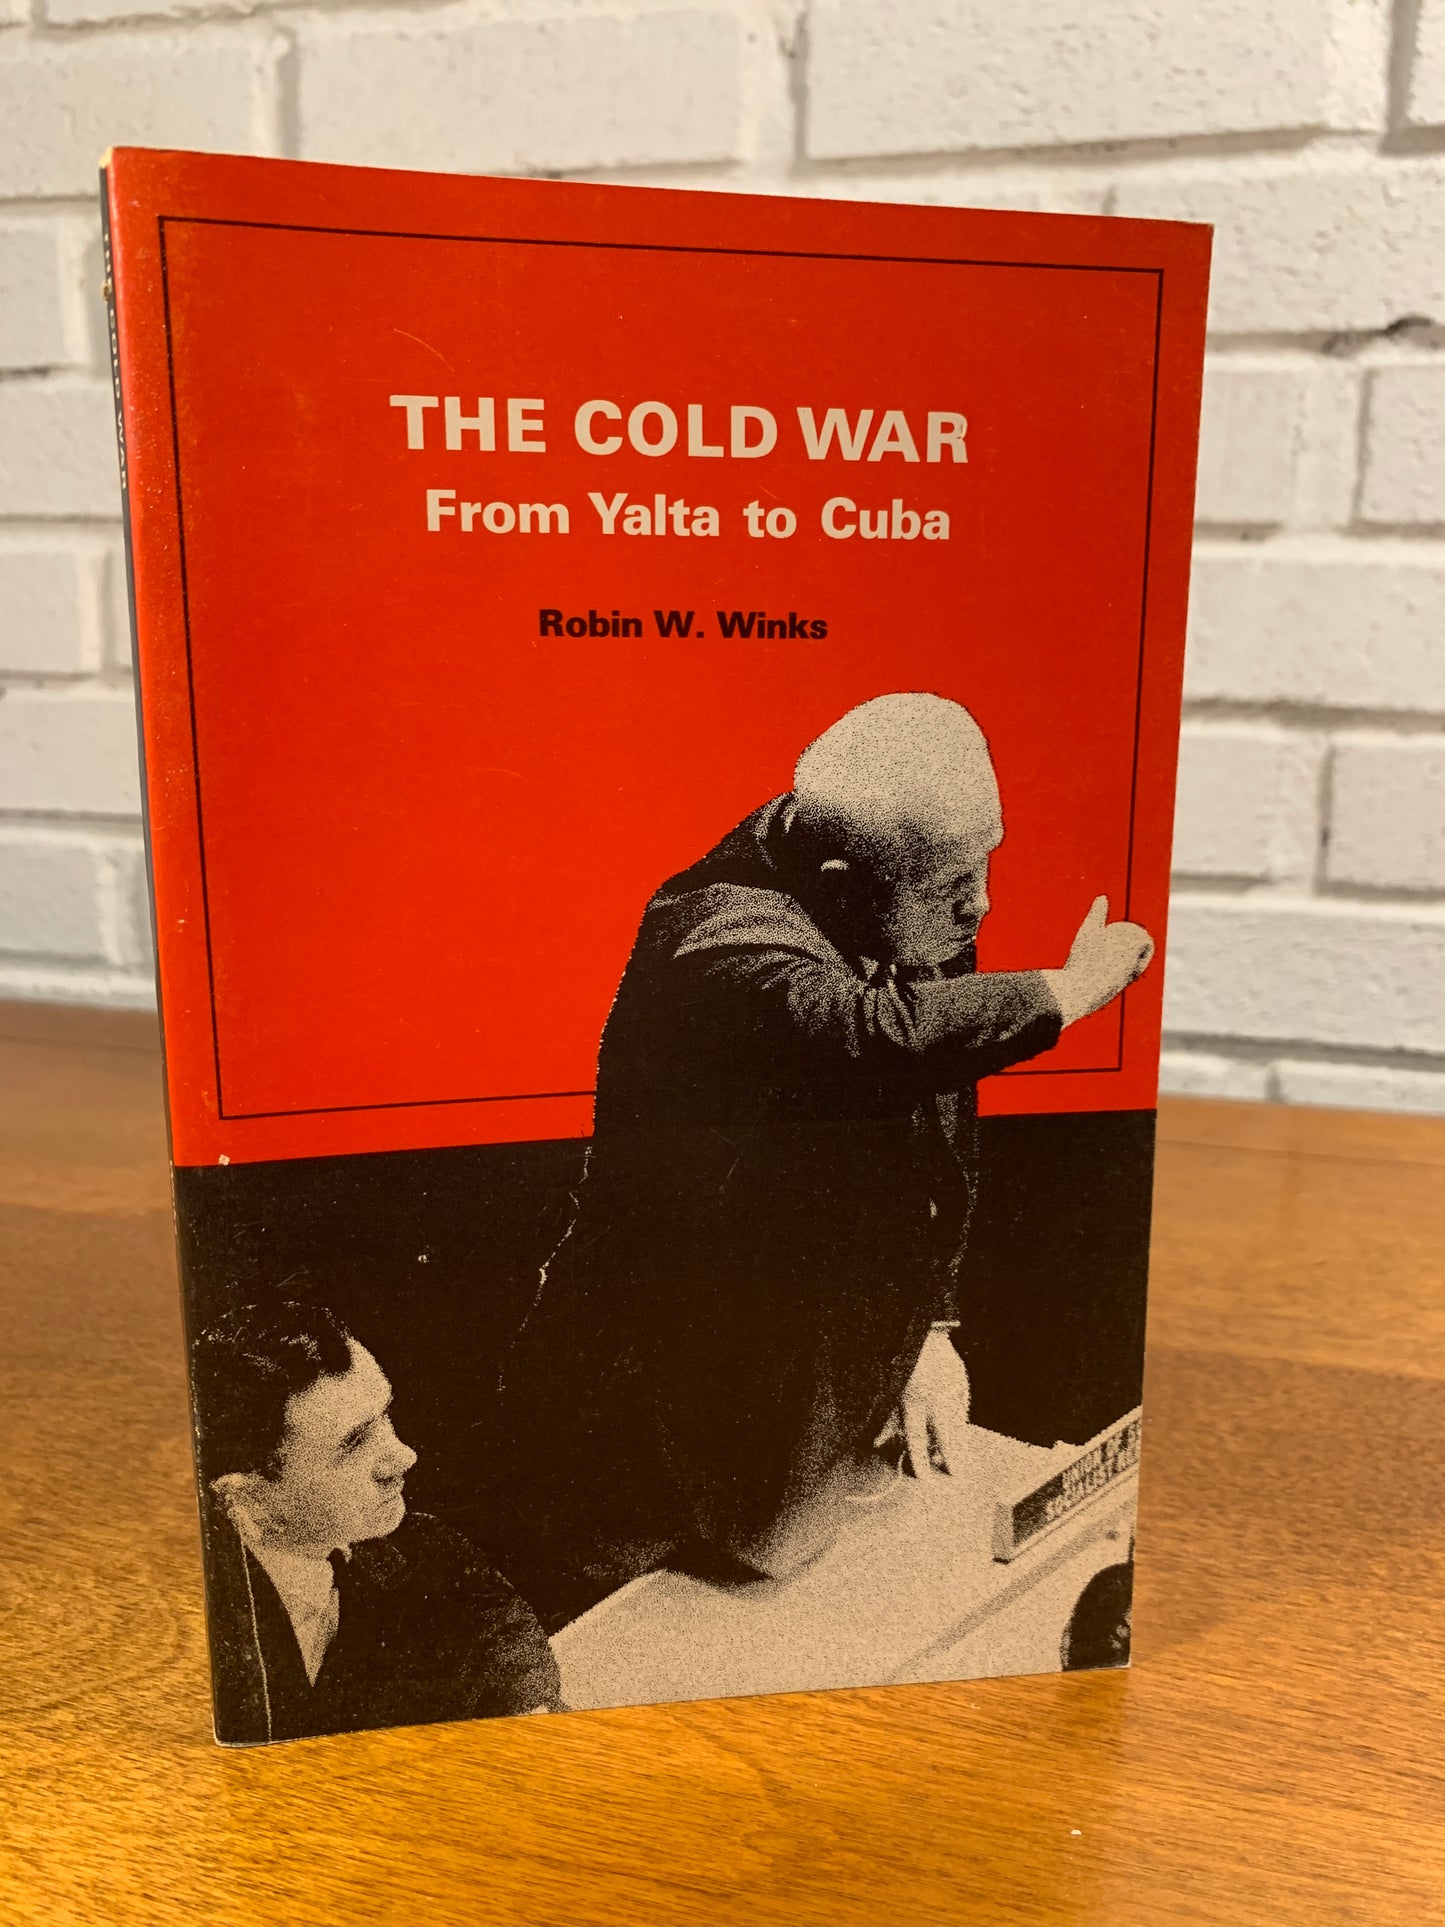 The Cold War from Yalta to Cuba by Robin W. Winks, 1964